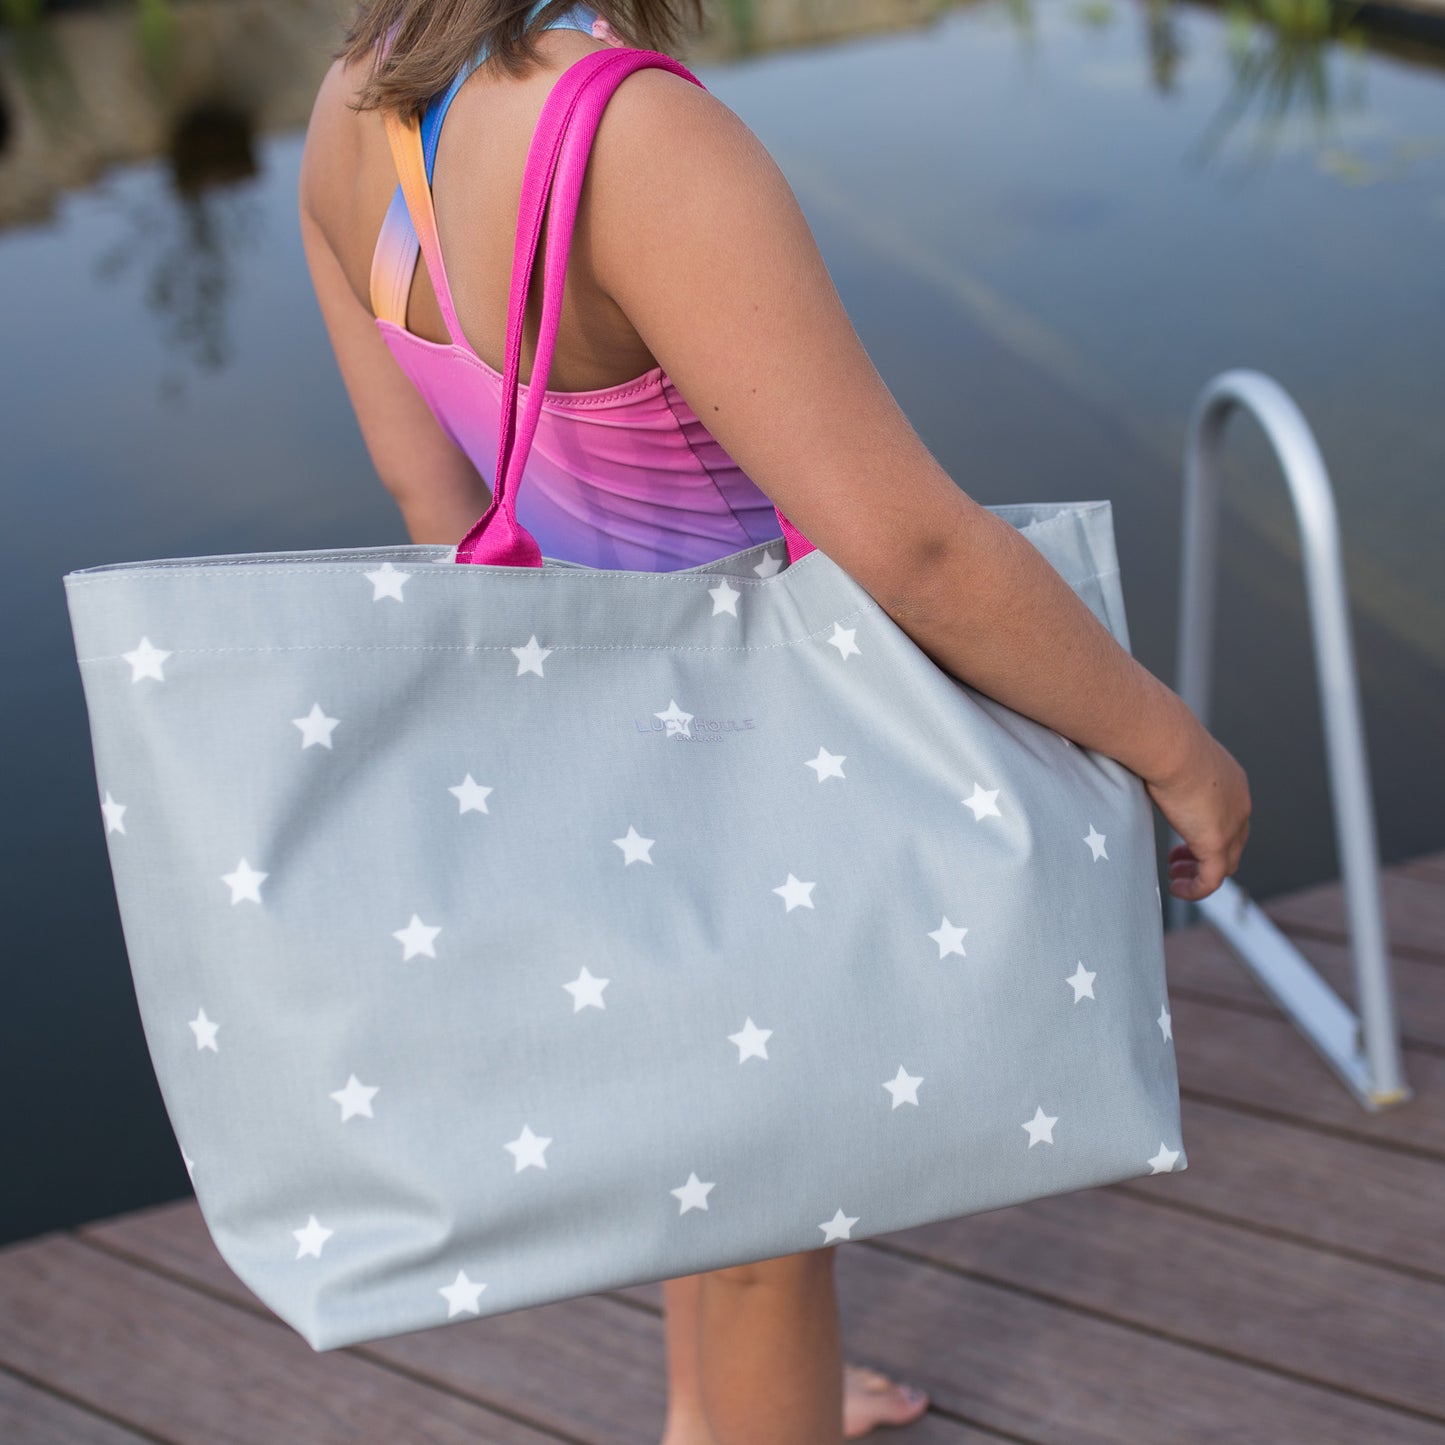 Grey & White Star Extra Large Tote Bag with Pink Handles